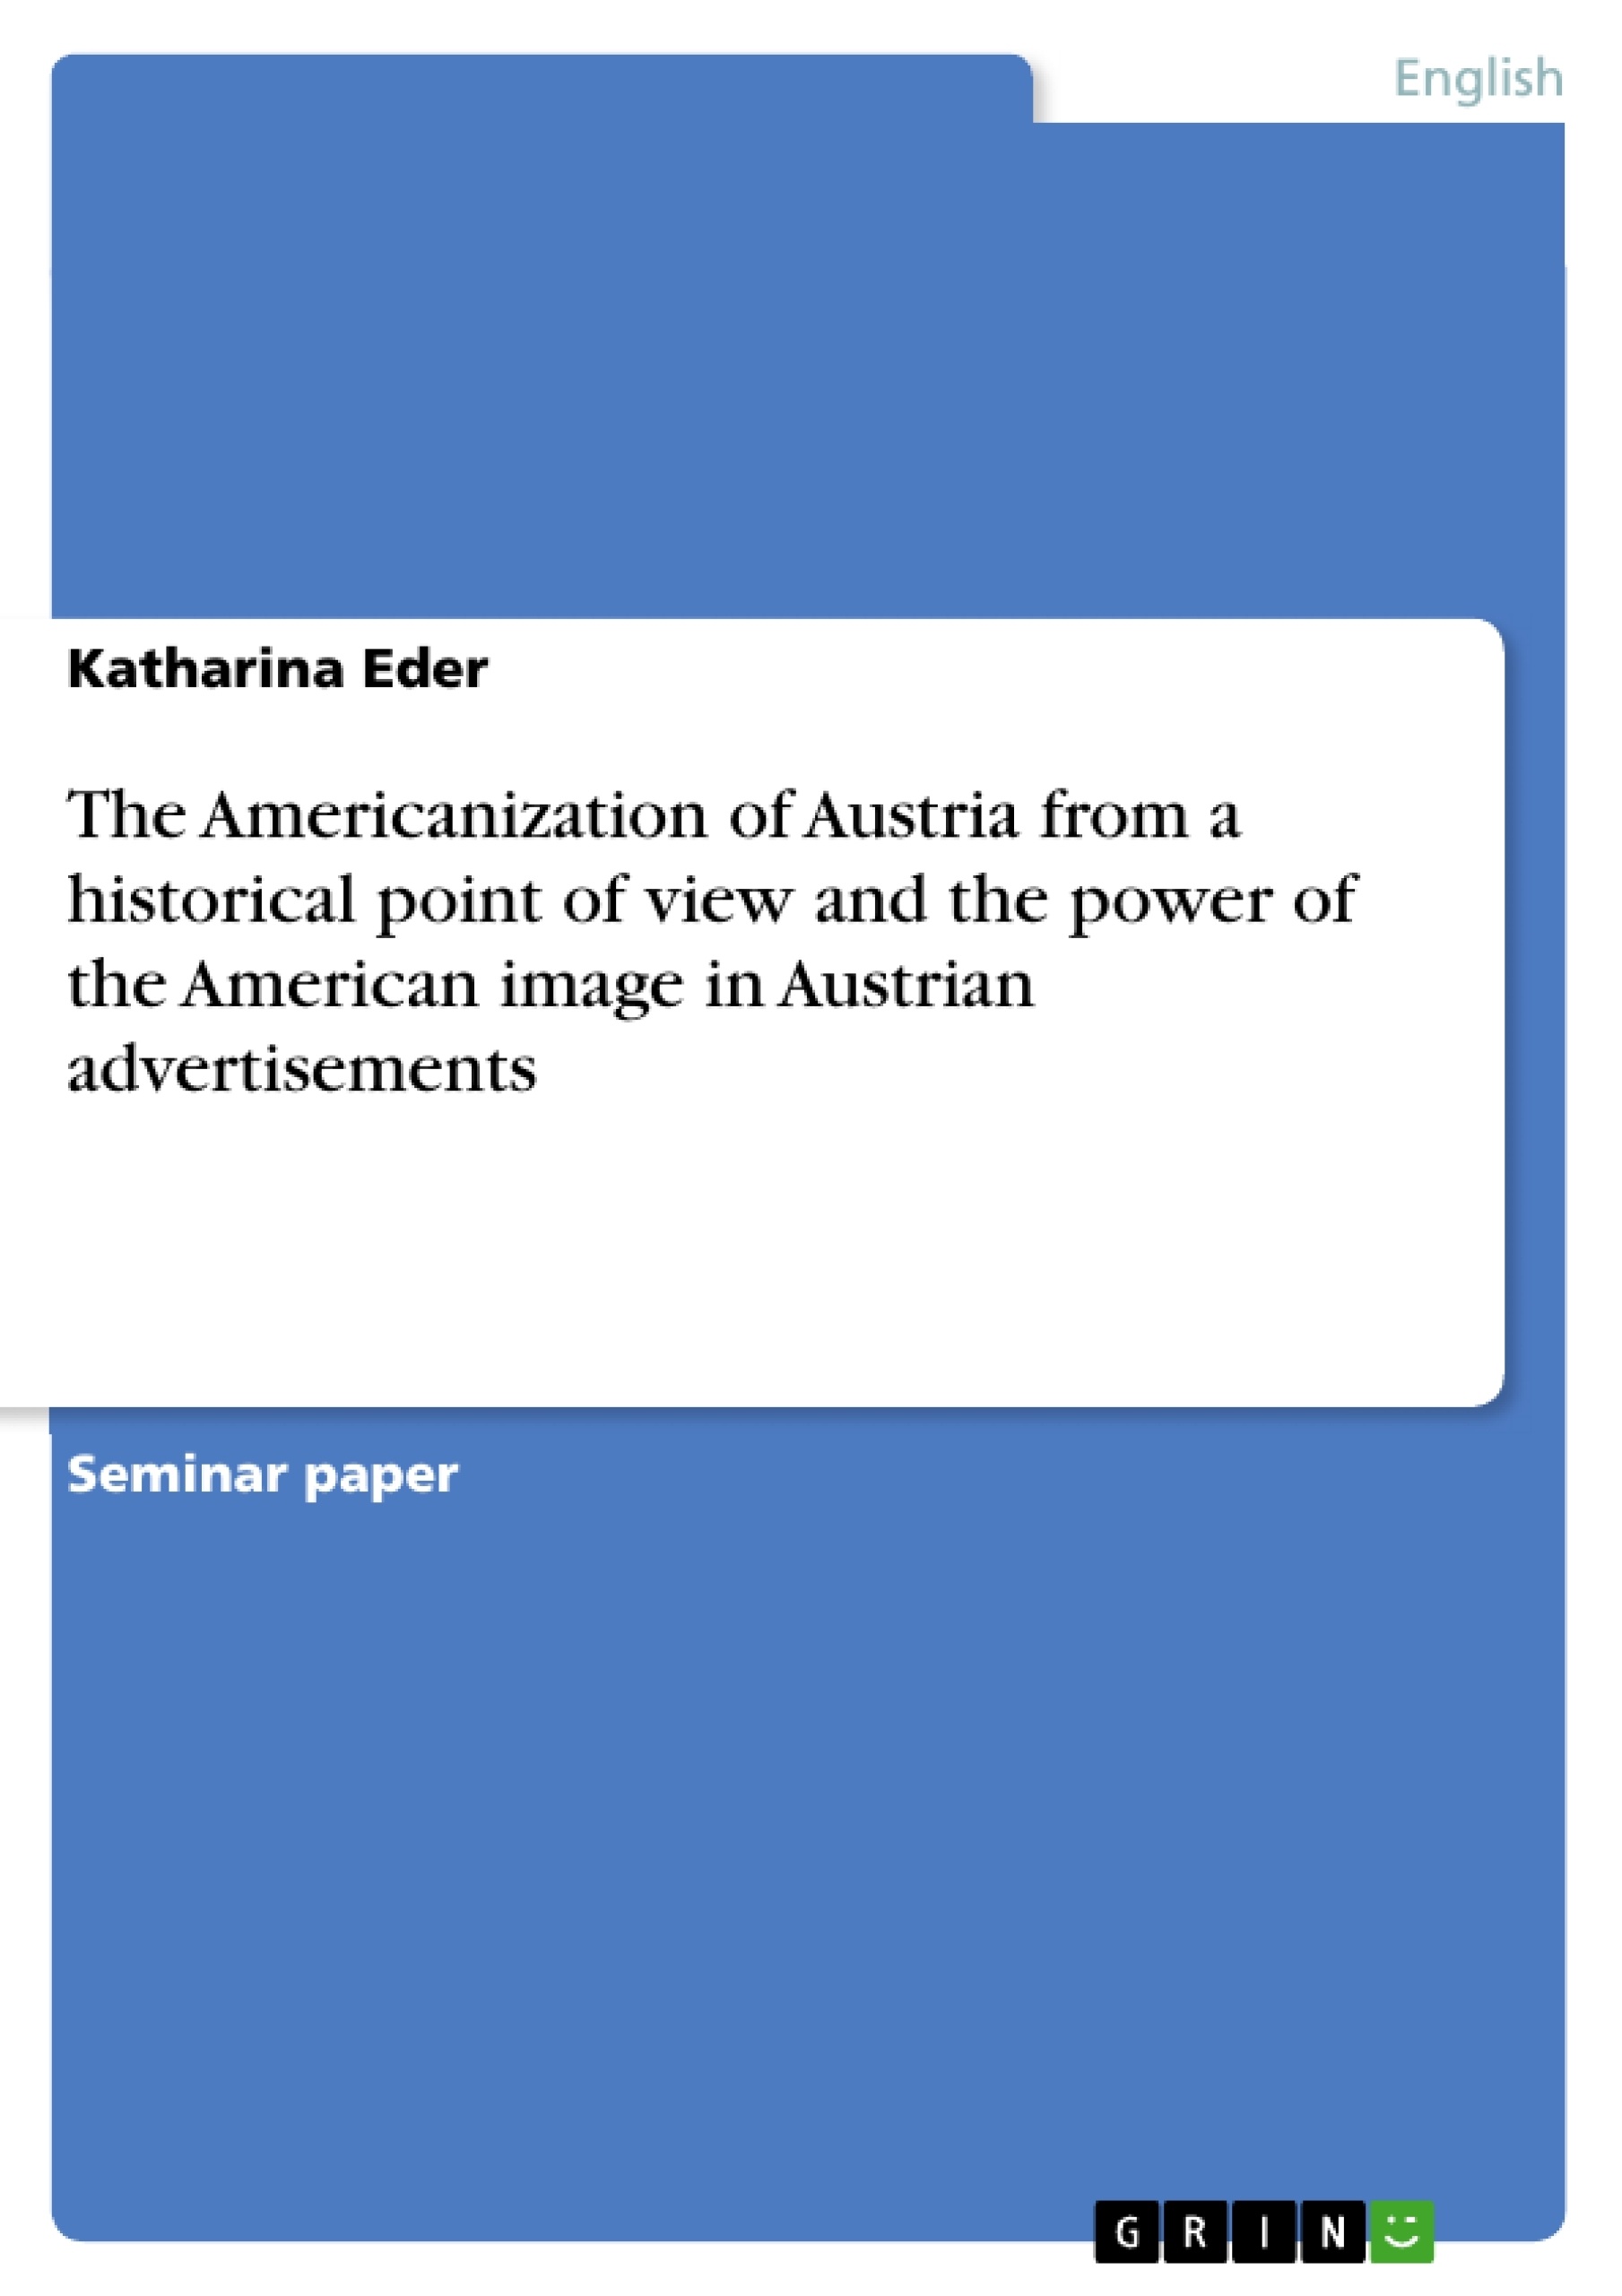 Title: The Americanization of Austria from a historical point of view and the power of the American image in Austrian advertisements